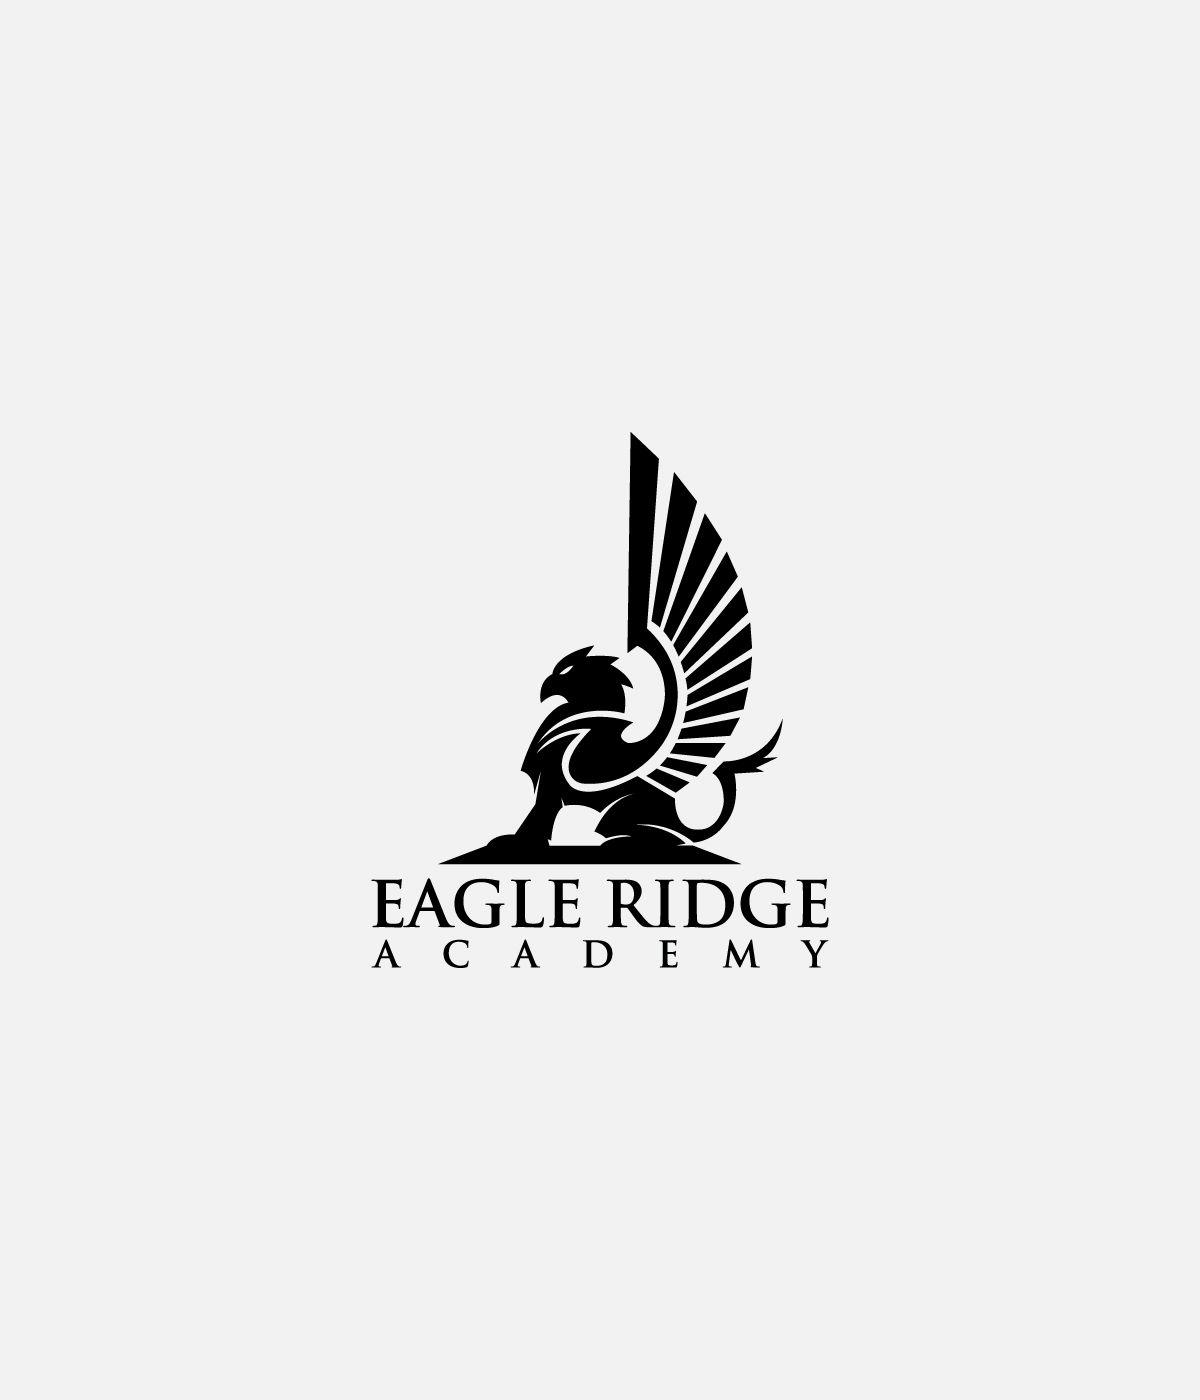 Gryphon Logo - Serious, Traditional, School Logo Design for Eagle Ridge Academy by ...